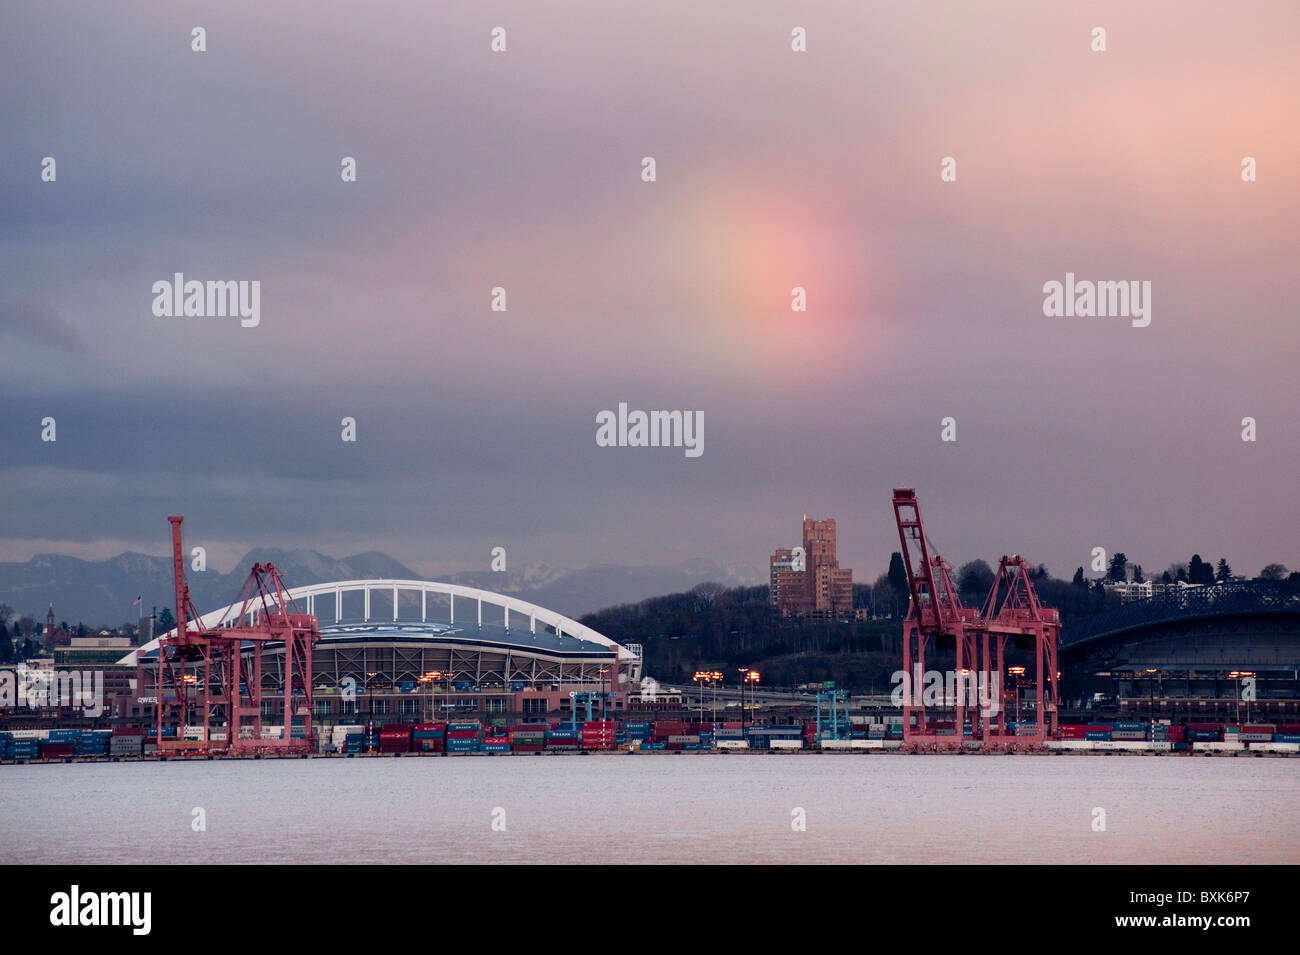 A rainbow appears over Qwest Field, home of the Seattle Seahawks football team looking across Elliott Bay in Seattle, USA. Stock Photo